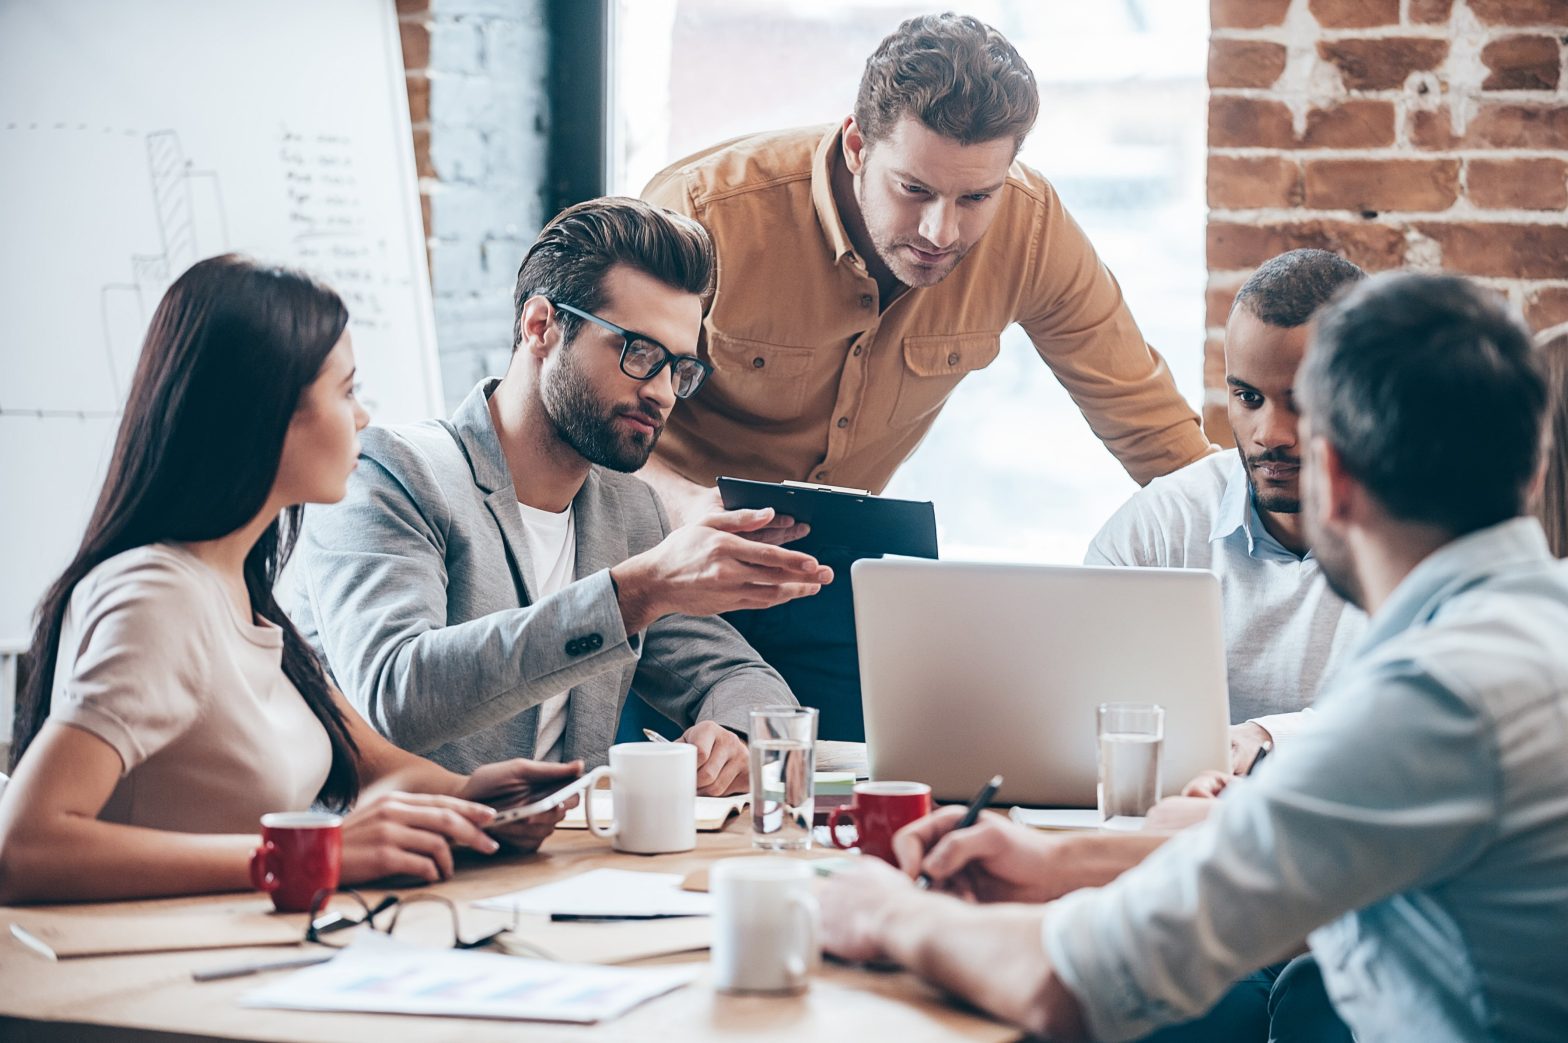 Employees and MSPs: Building and Supporting Your In-House Cybersecurity Team